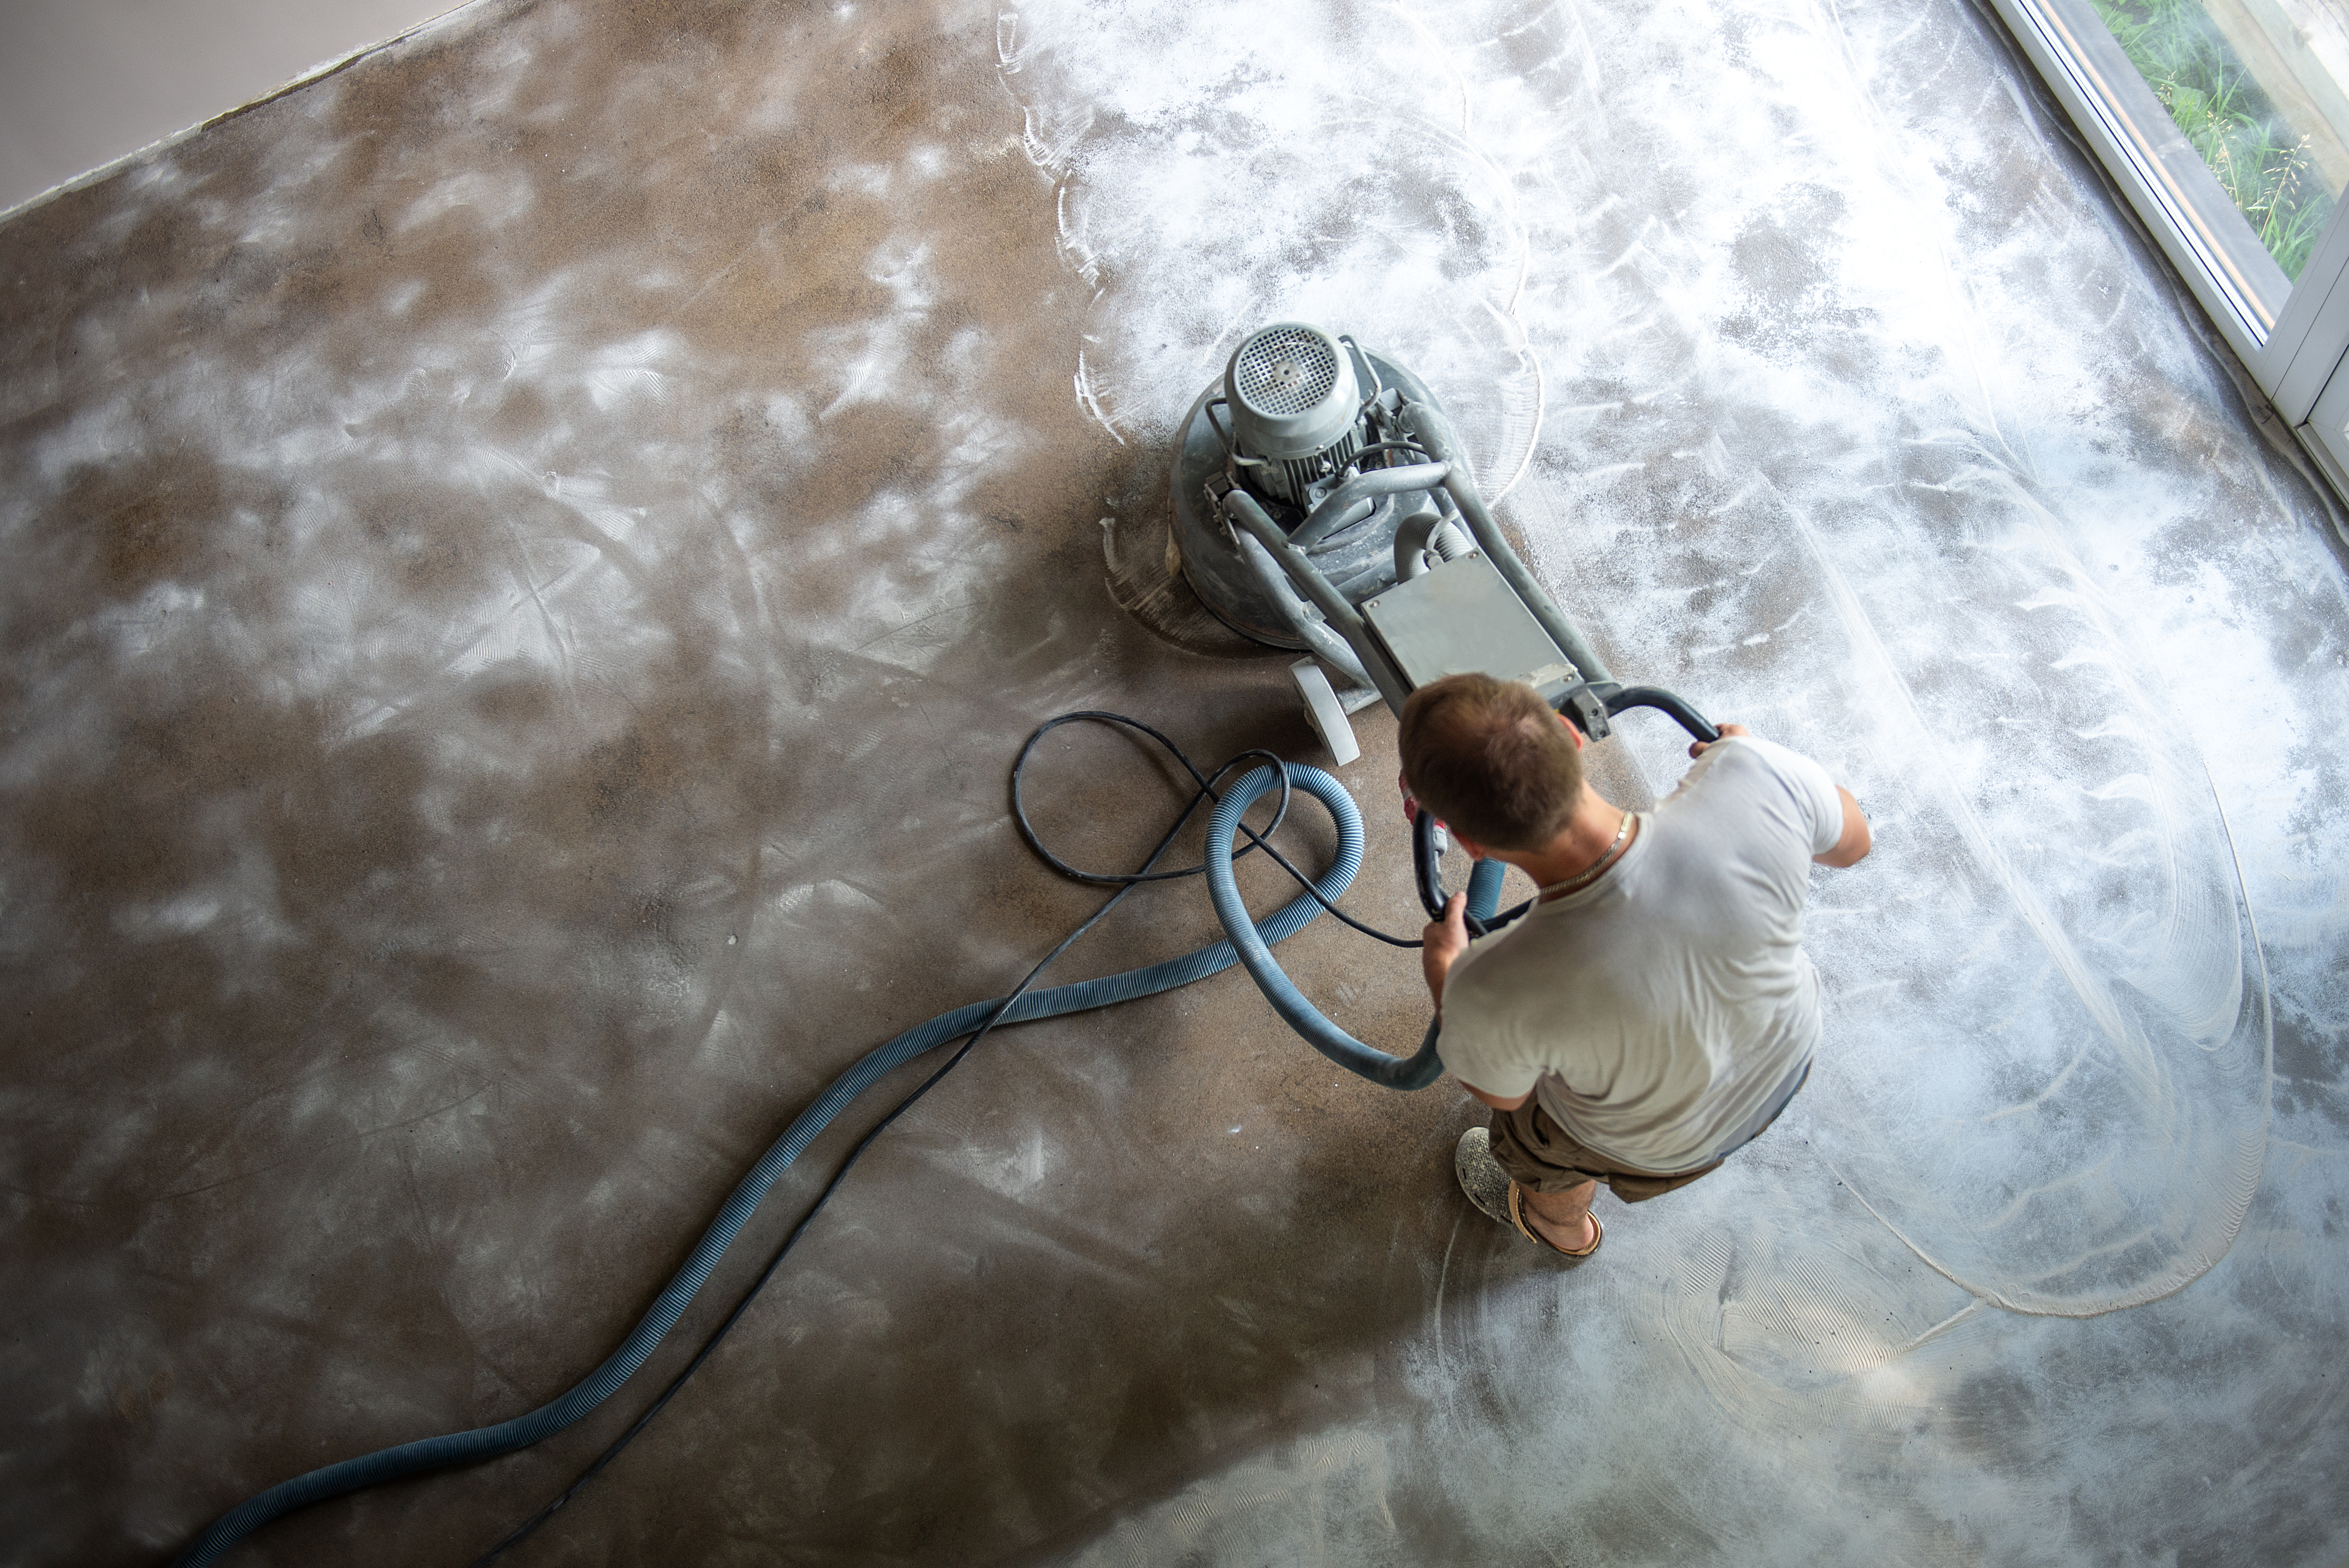 Safety First: Best Practices for Operating Concrete Grinders in Commercial Settings